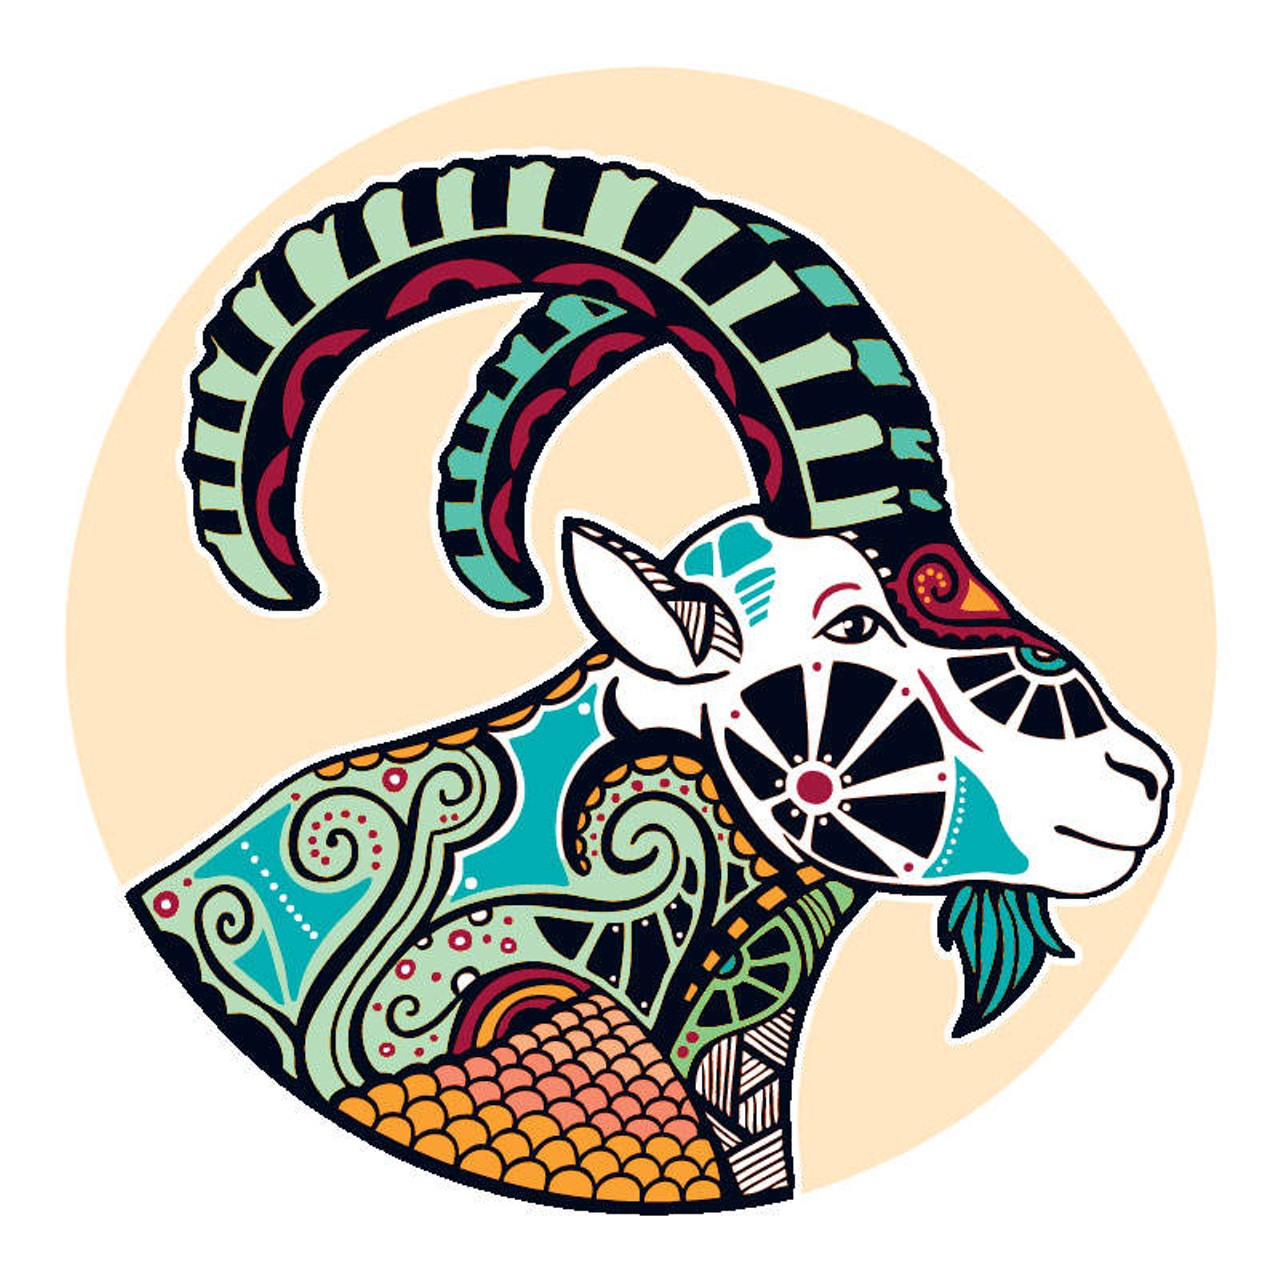 CAPRICORN (Dec. 21-Jan. 20): 
You didn&#146;t come here to live a simple or trivial life. At the moment all kinds of stuff is piling up to make you wonder what you&#146;re here for. Not knowing how to handle things competes with the sense that you need to be totally on the ball &#151; especially when it comes to your relationships. Within this dynamic there are feelings of frustration that will not smooth out for a couple of months. The last thing you want to do is screw yourself up. Ironing things out will require you to come to terms with other people. Seeing them for who they truly are is what&#146;s at issue right now.